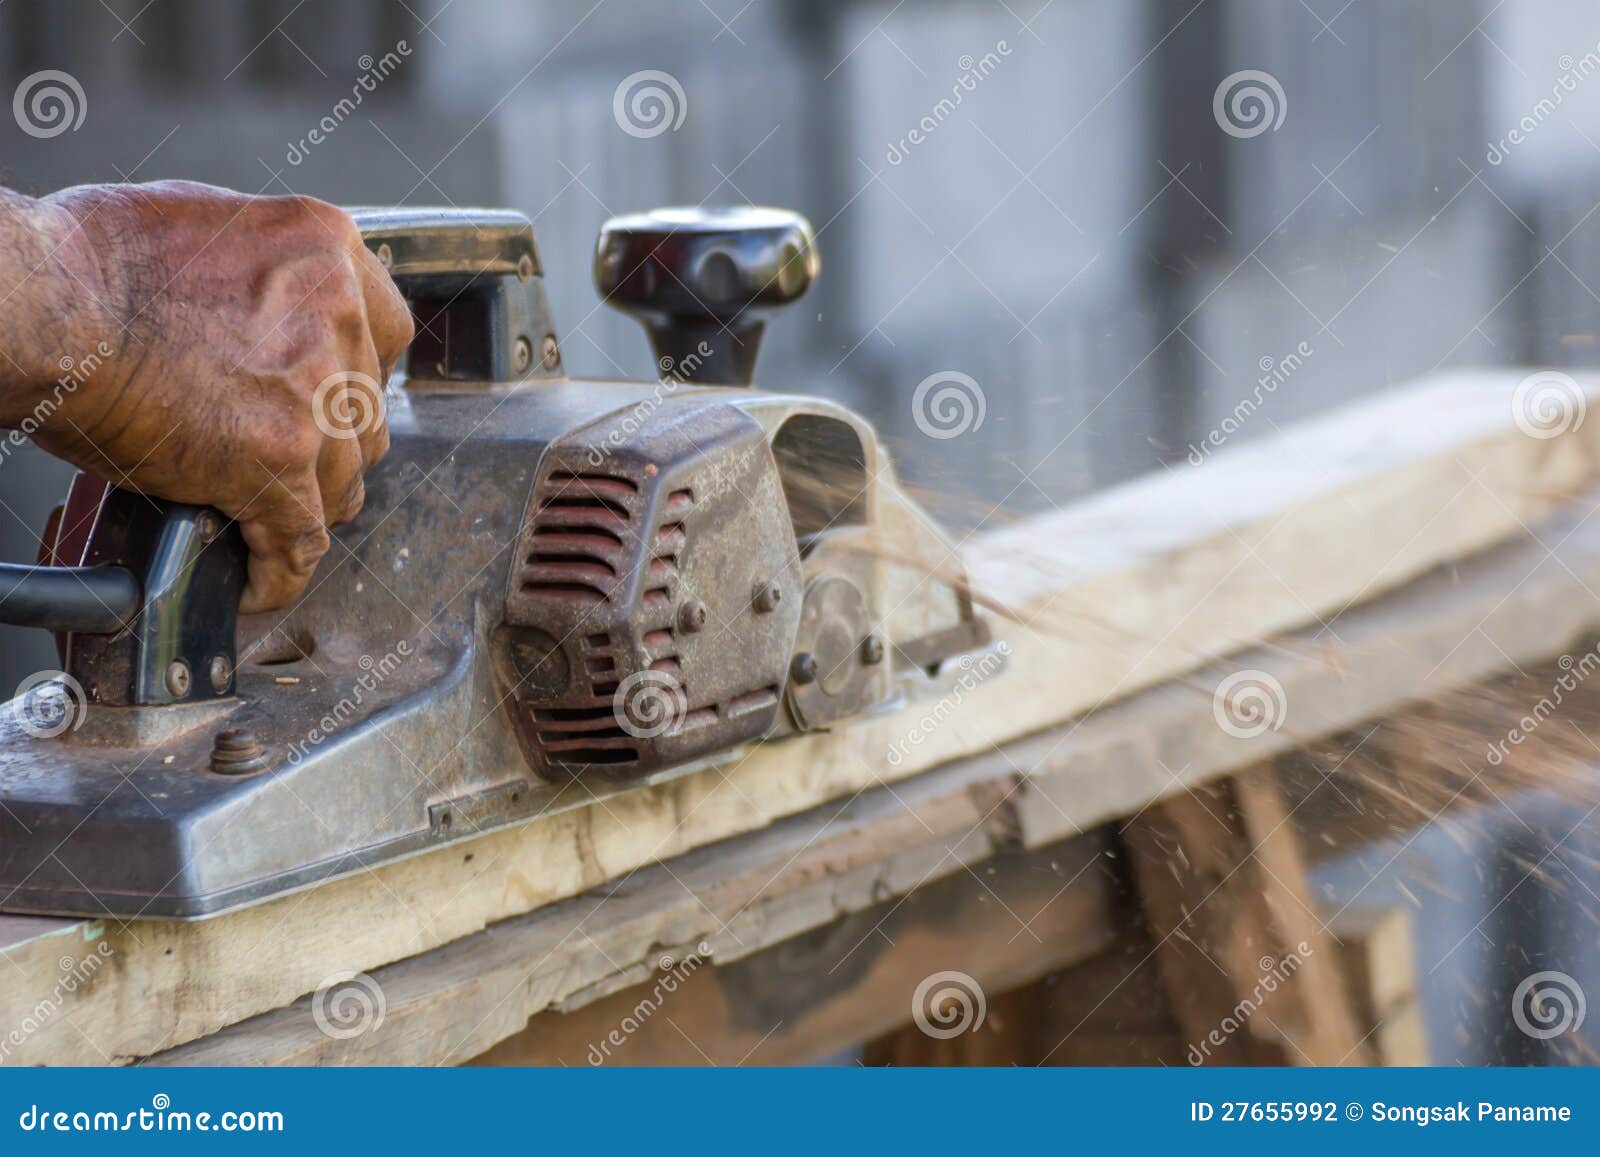 Carpenter working with electric planer in his workshop, close up on 